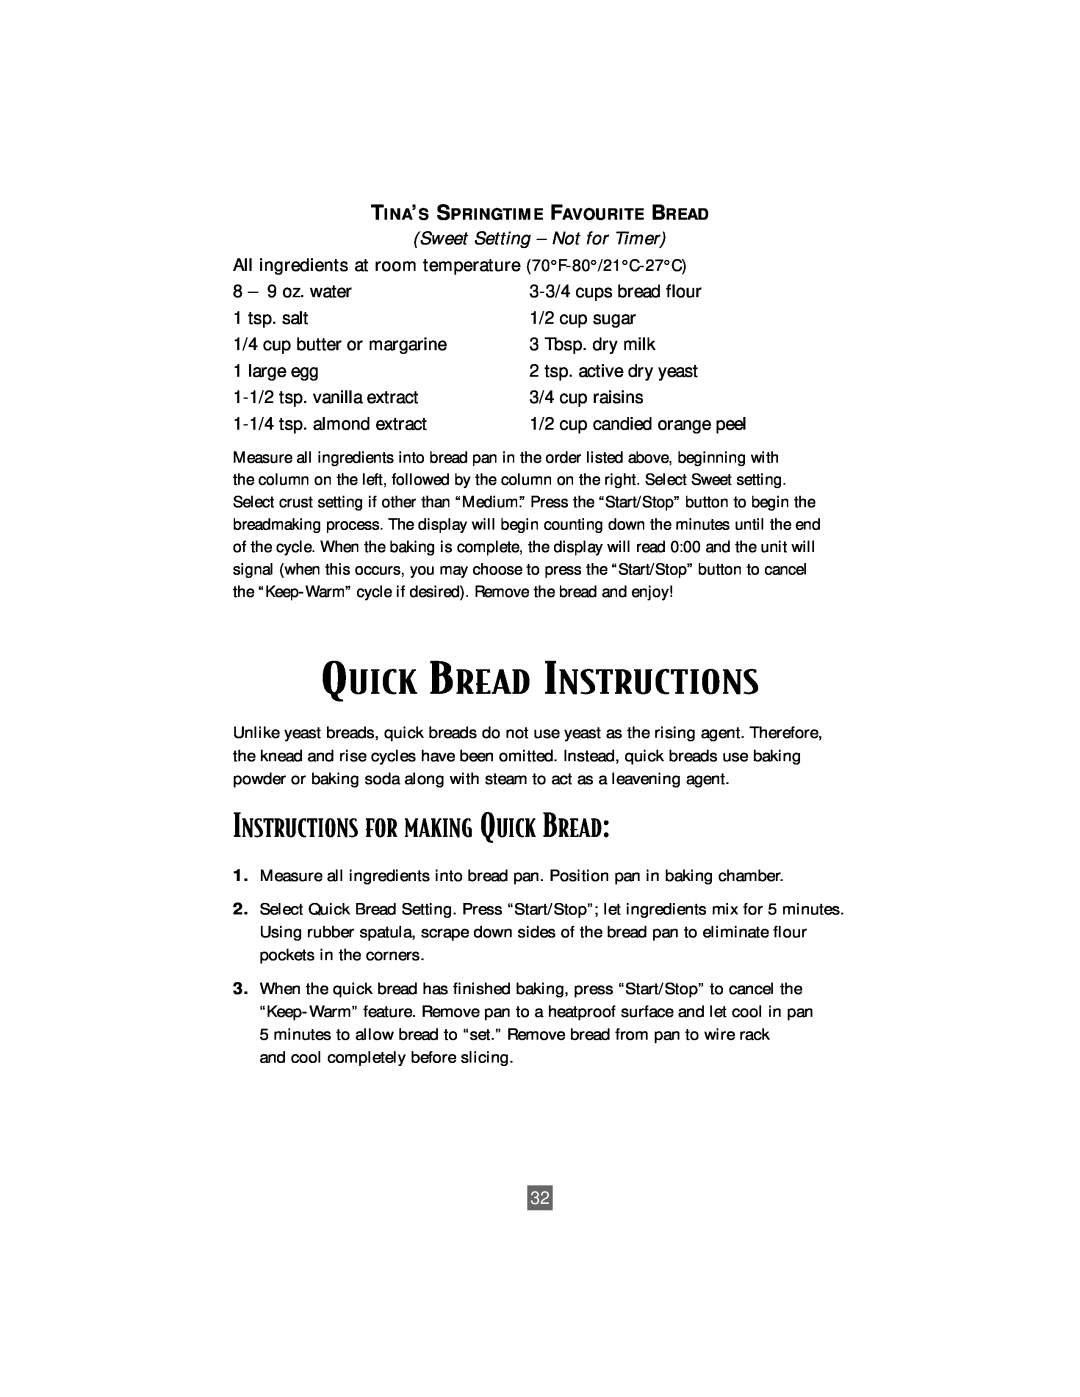 Oster P. N. 101017 manual Quick Bread Instructions, Instructions For Making Quick Bread, Sweet Setting - Not for Timer 